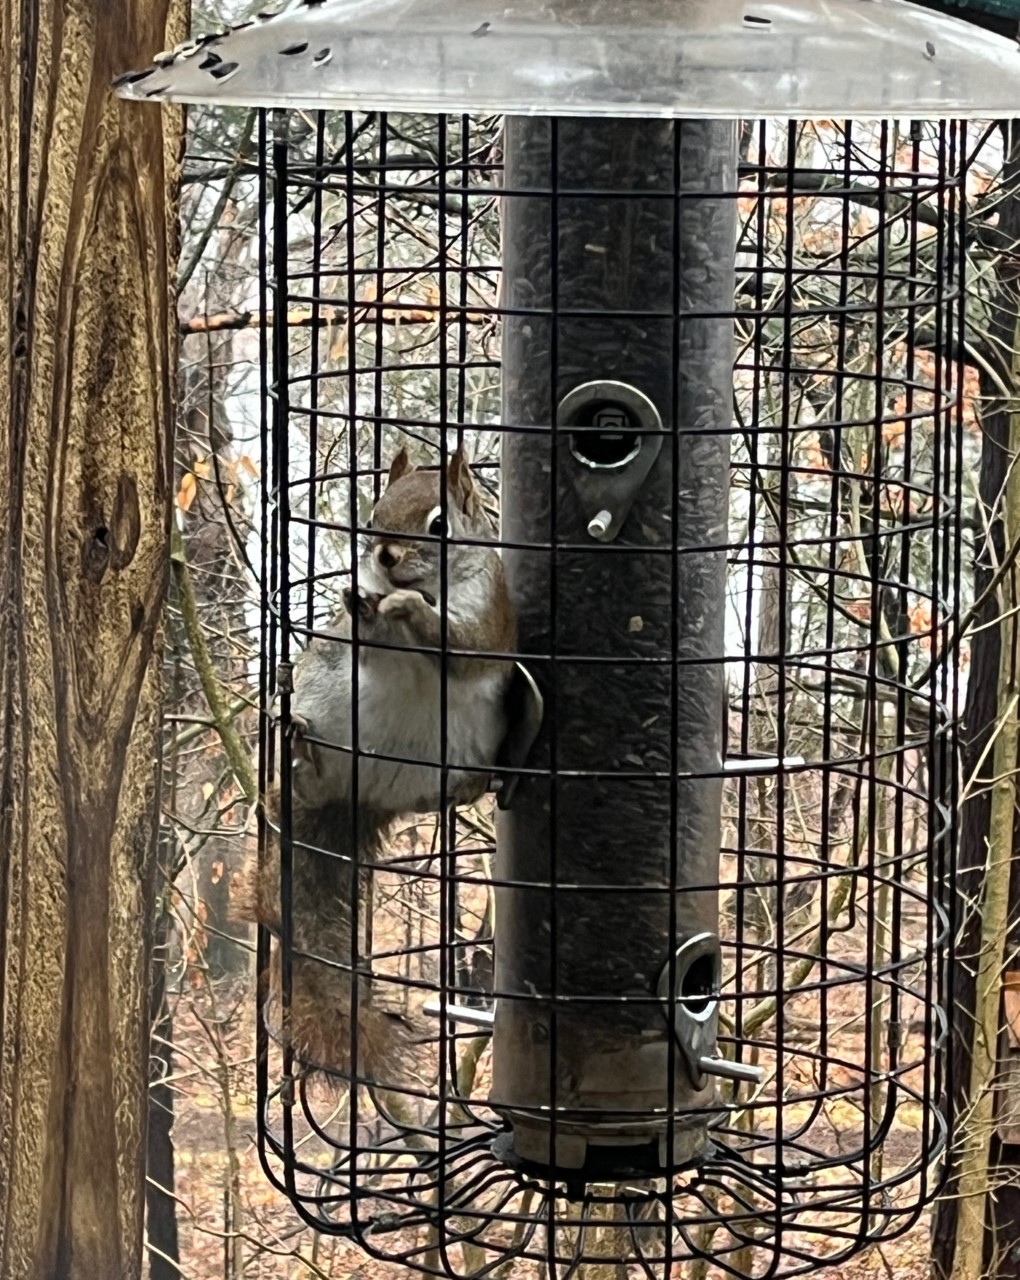 Red Squirrel overcoming our "squirrel proof" feeder